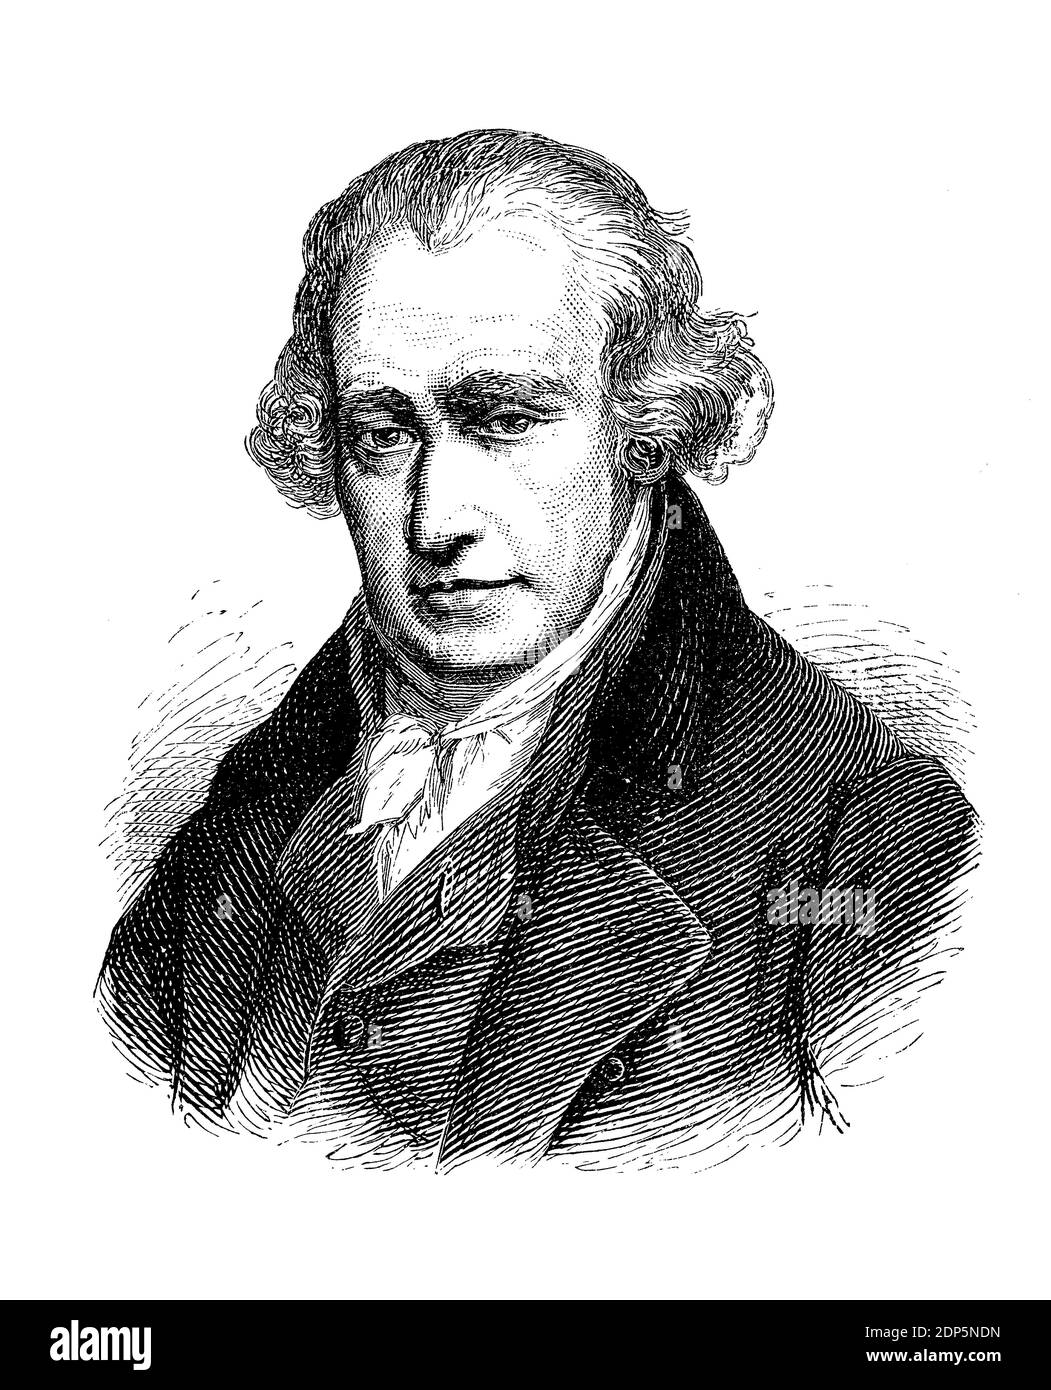 Engraving portrait of James Watt (1736–1819)  Scottish inventor, mechanical engineer and chemist, famous for his steam engine of improved power and efficiency Stock Photo